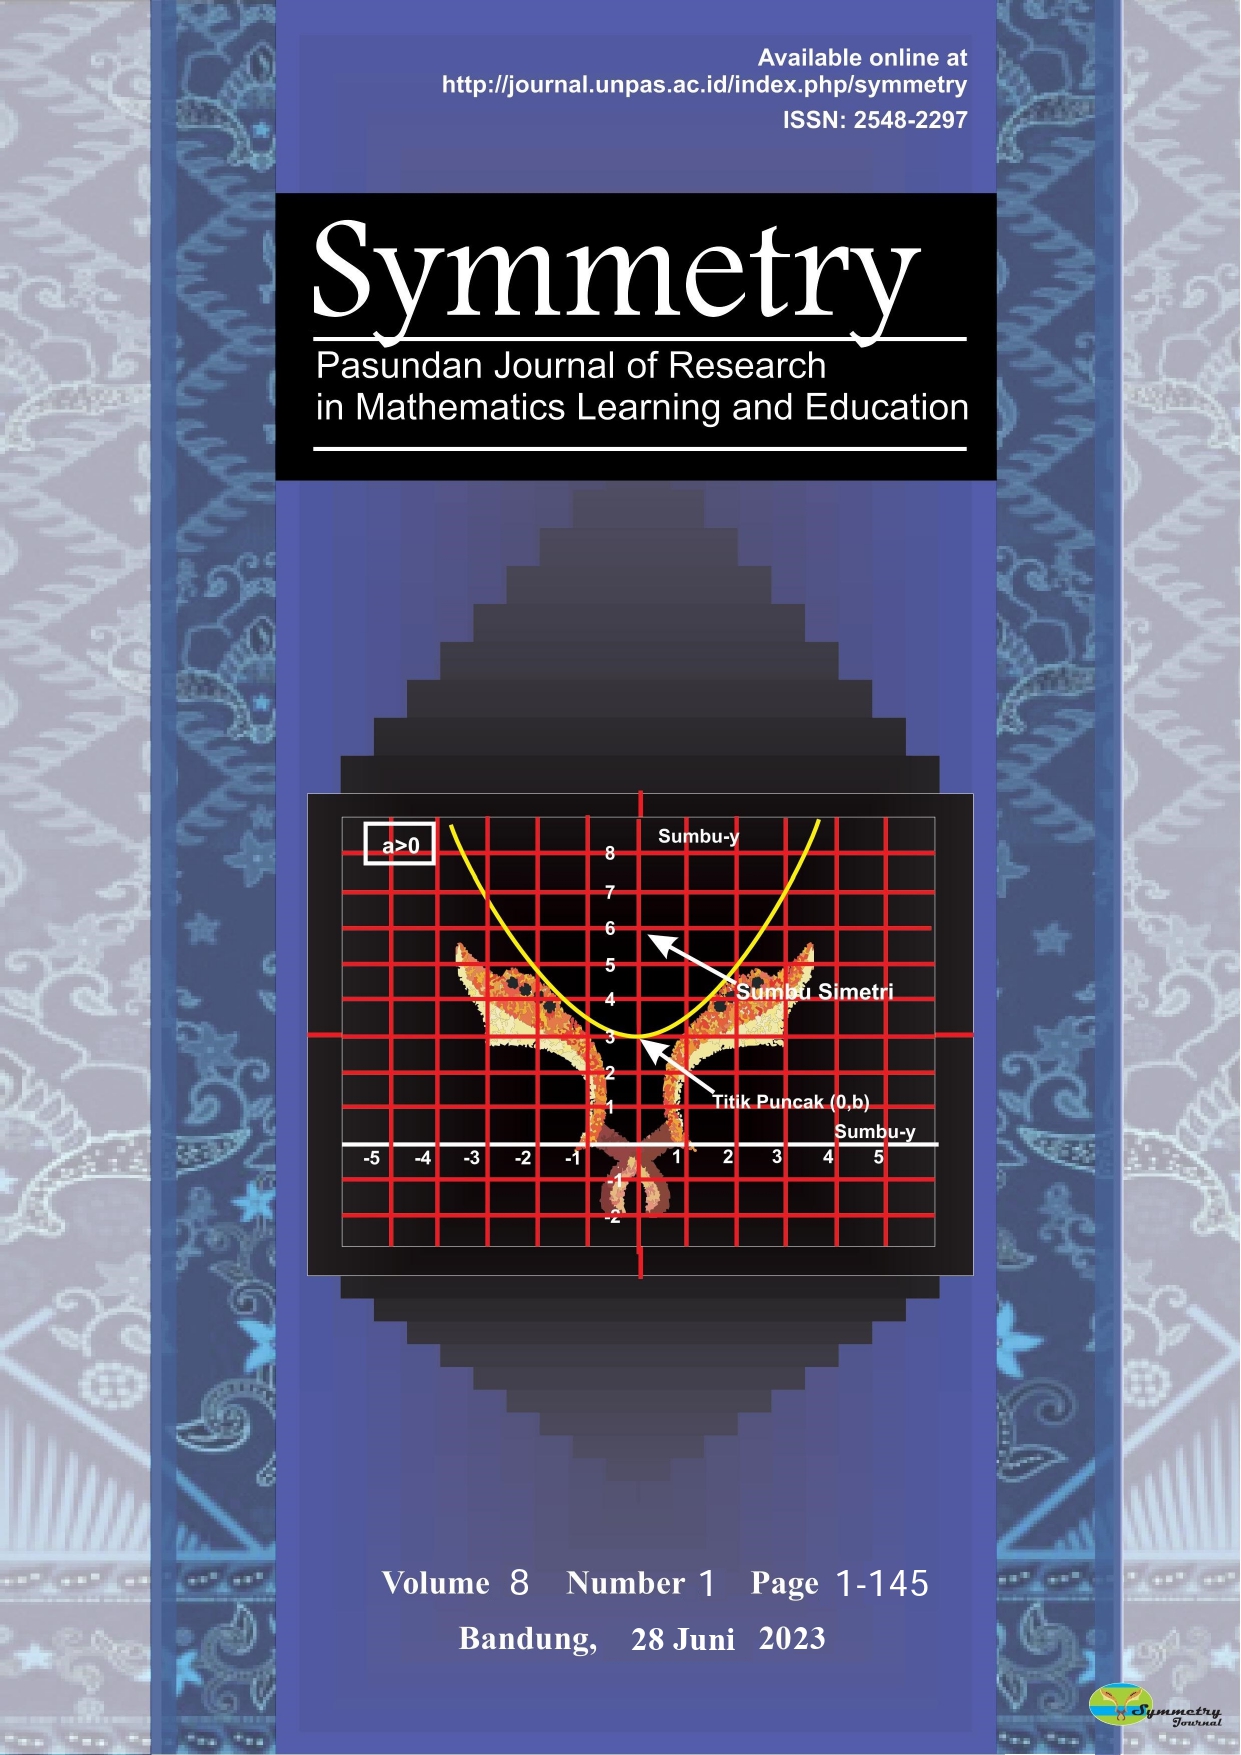 					View Vol. 8 No. 2 (2023): Symmetry: Pasundan Journal of Research in Mathematics Learning and Education
				